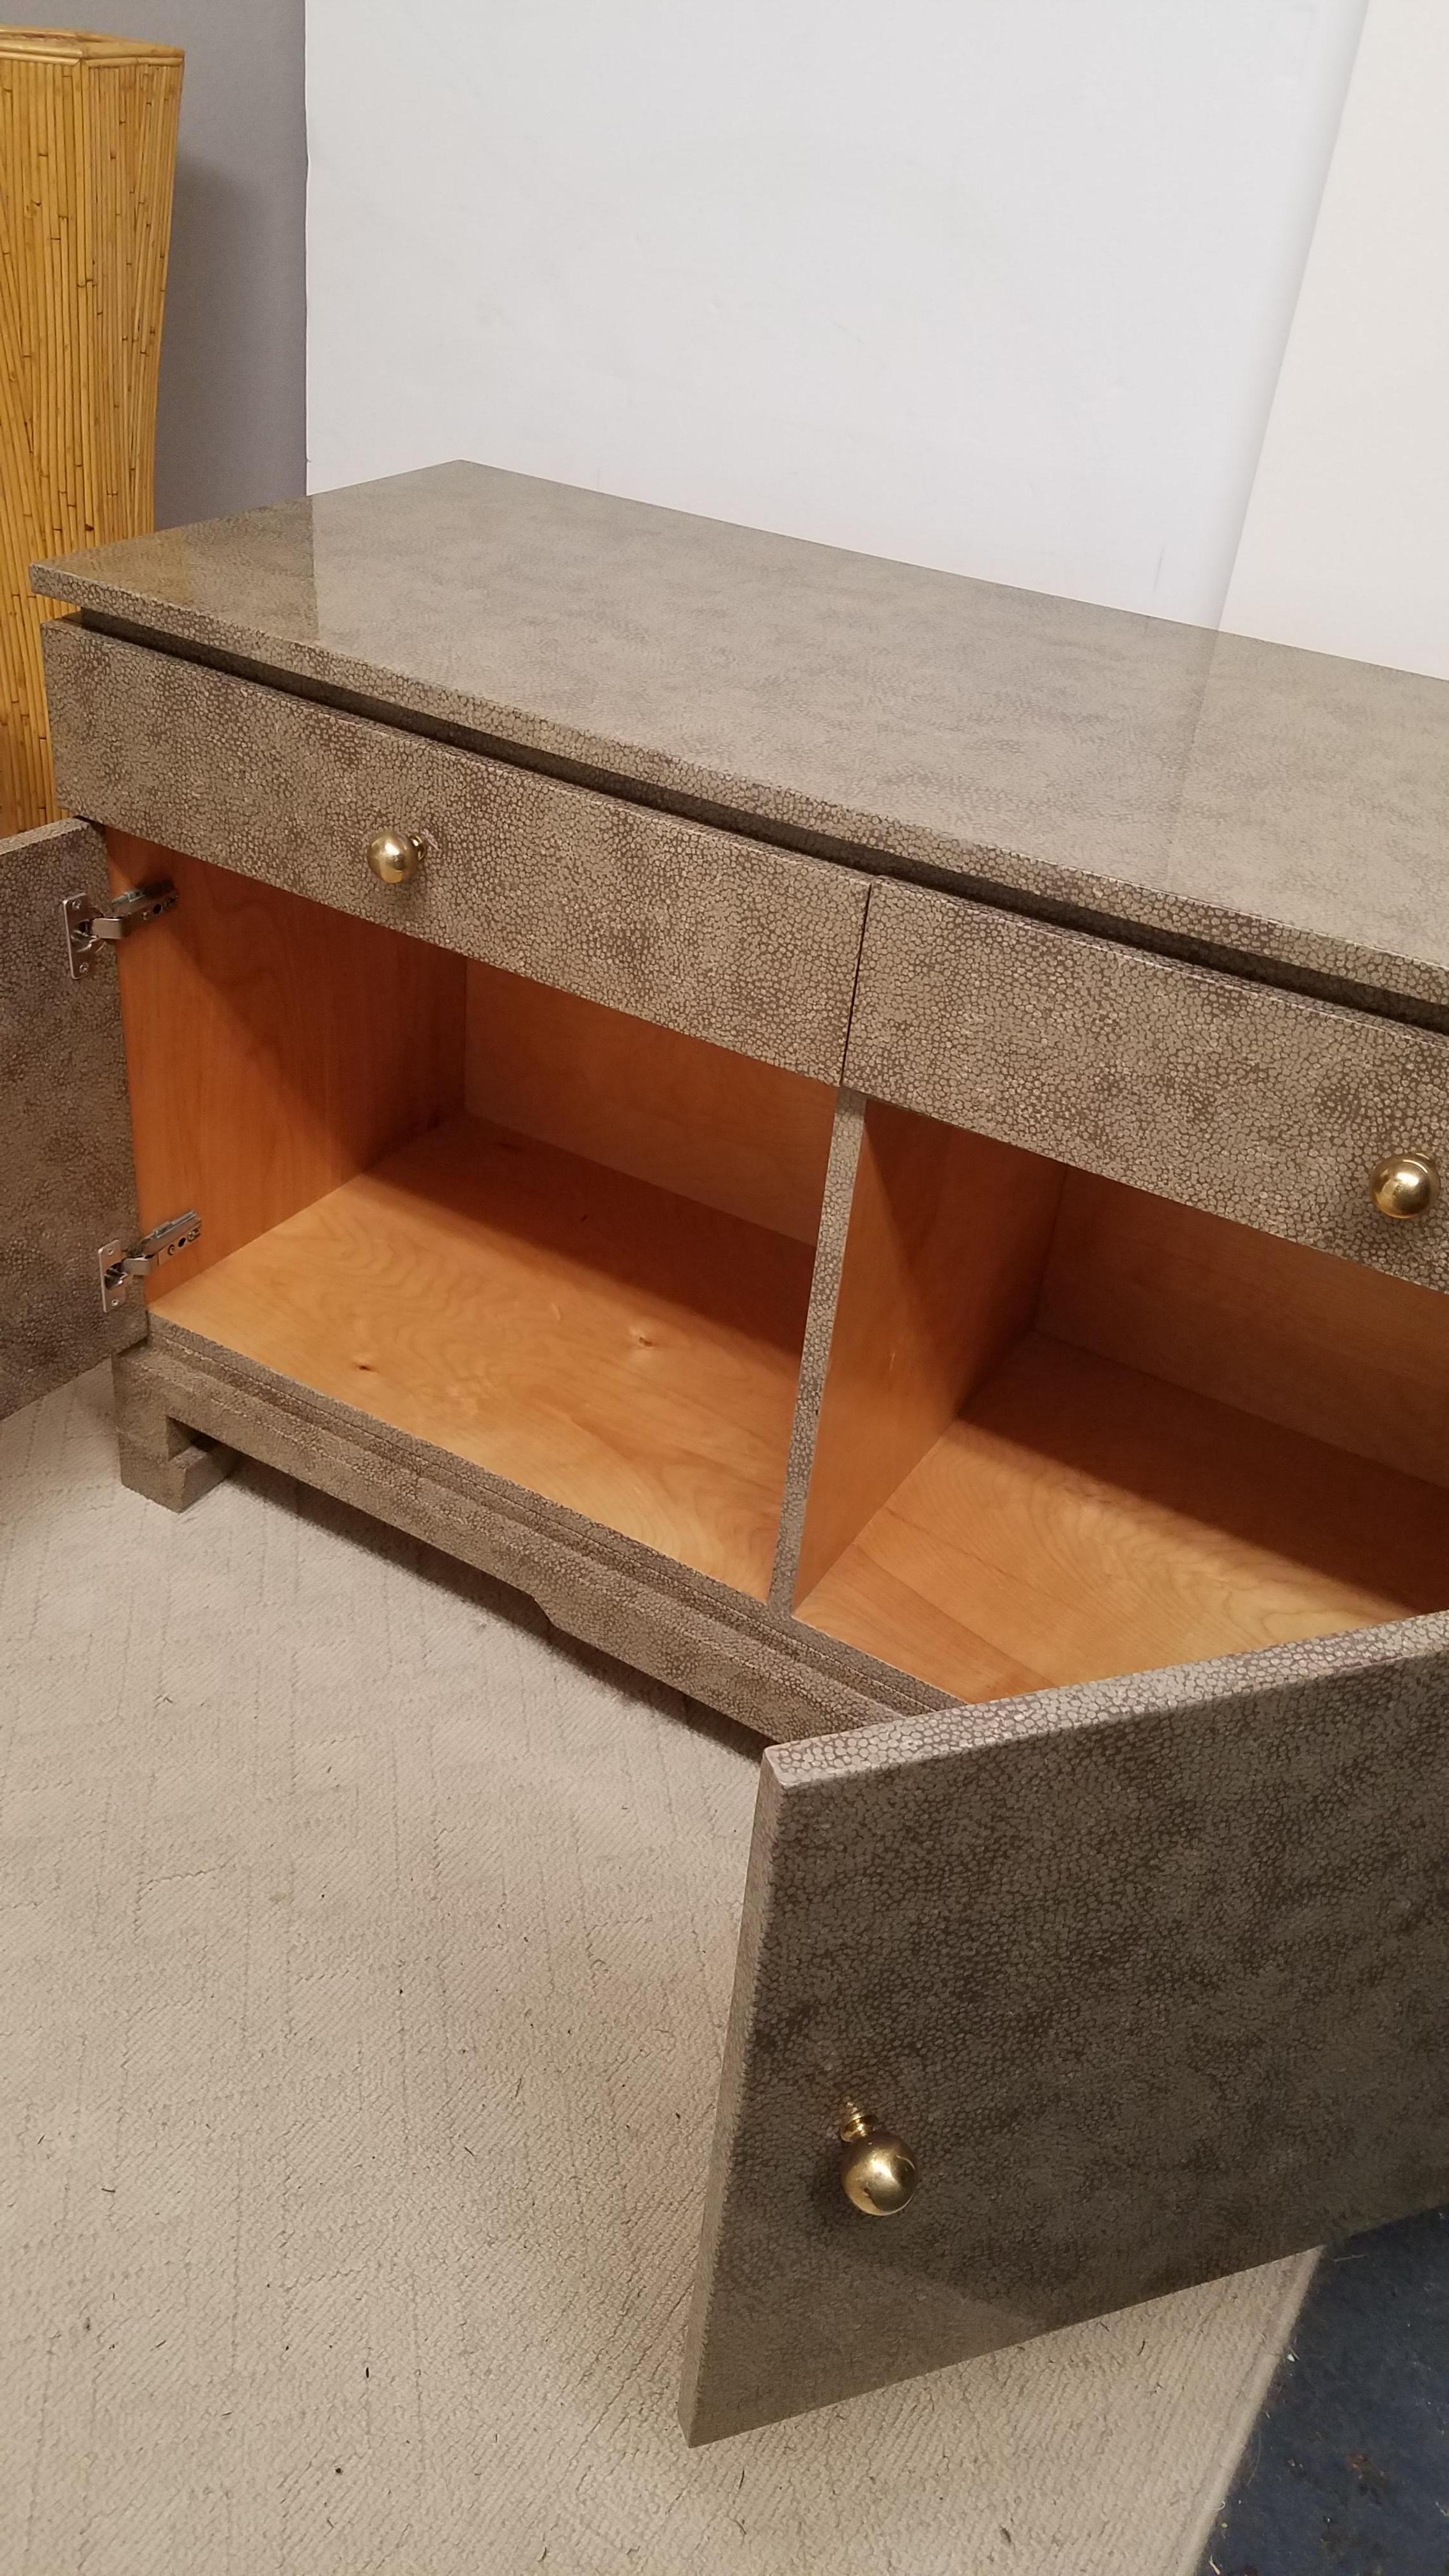 An Asian faux shagreen wrapped server credenza with 2 drawers and 2 doored cabinet below. Polished brass ball hardware with a high gloss finish. Custom decorator piece attributed to Karl Springer.